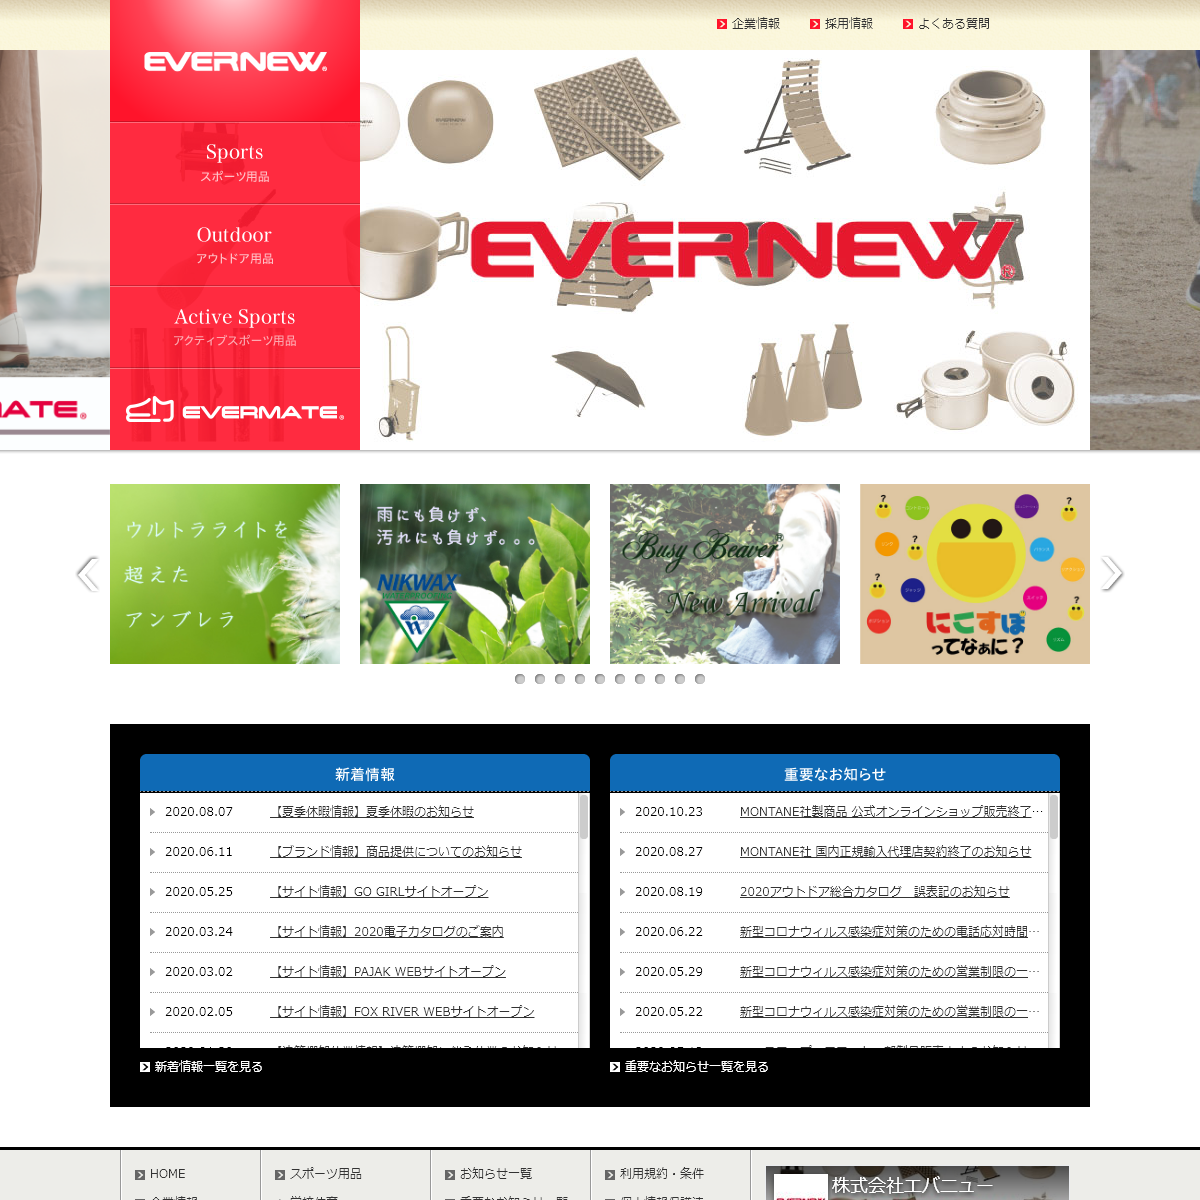 A complete backup of evernew.co.jp